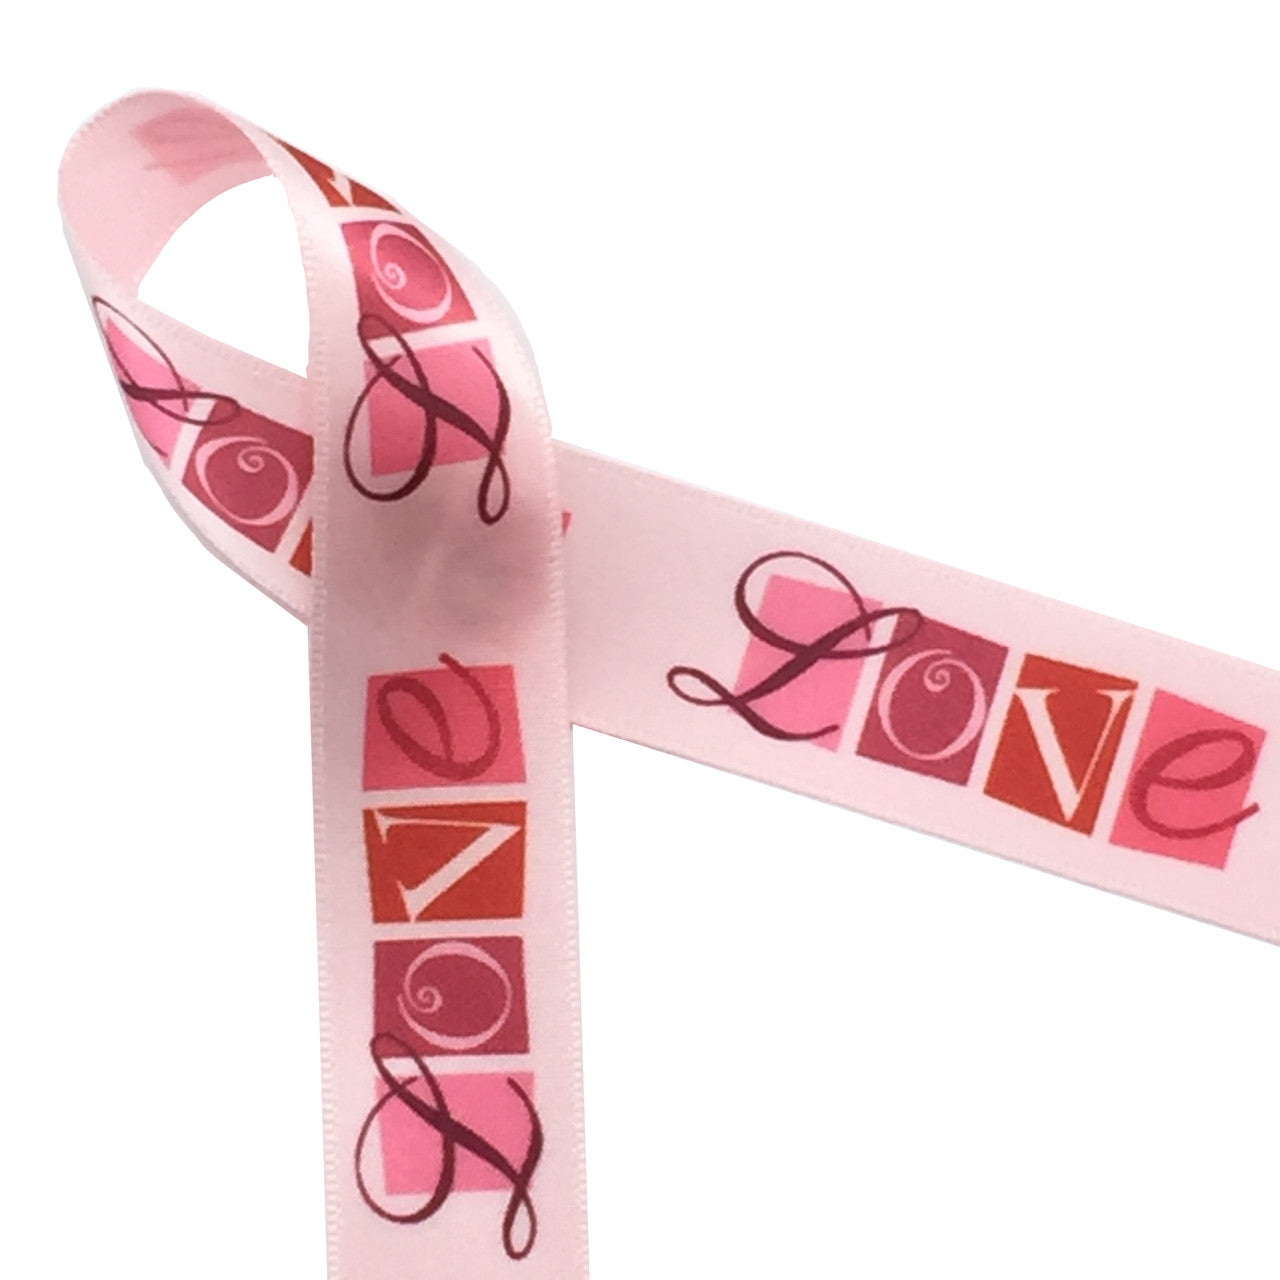 There is nothing like expressing you LOVE on Valentine's Day! Our love word block ribbon on 7/8" light pink satin will make the statement for you when you tie a gift for that special someone!